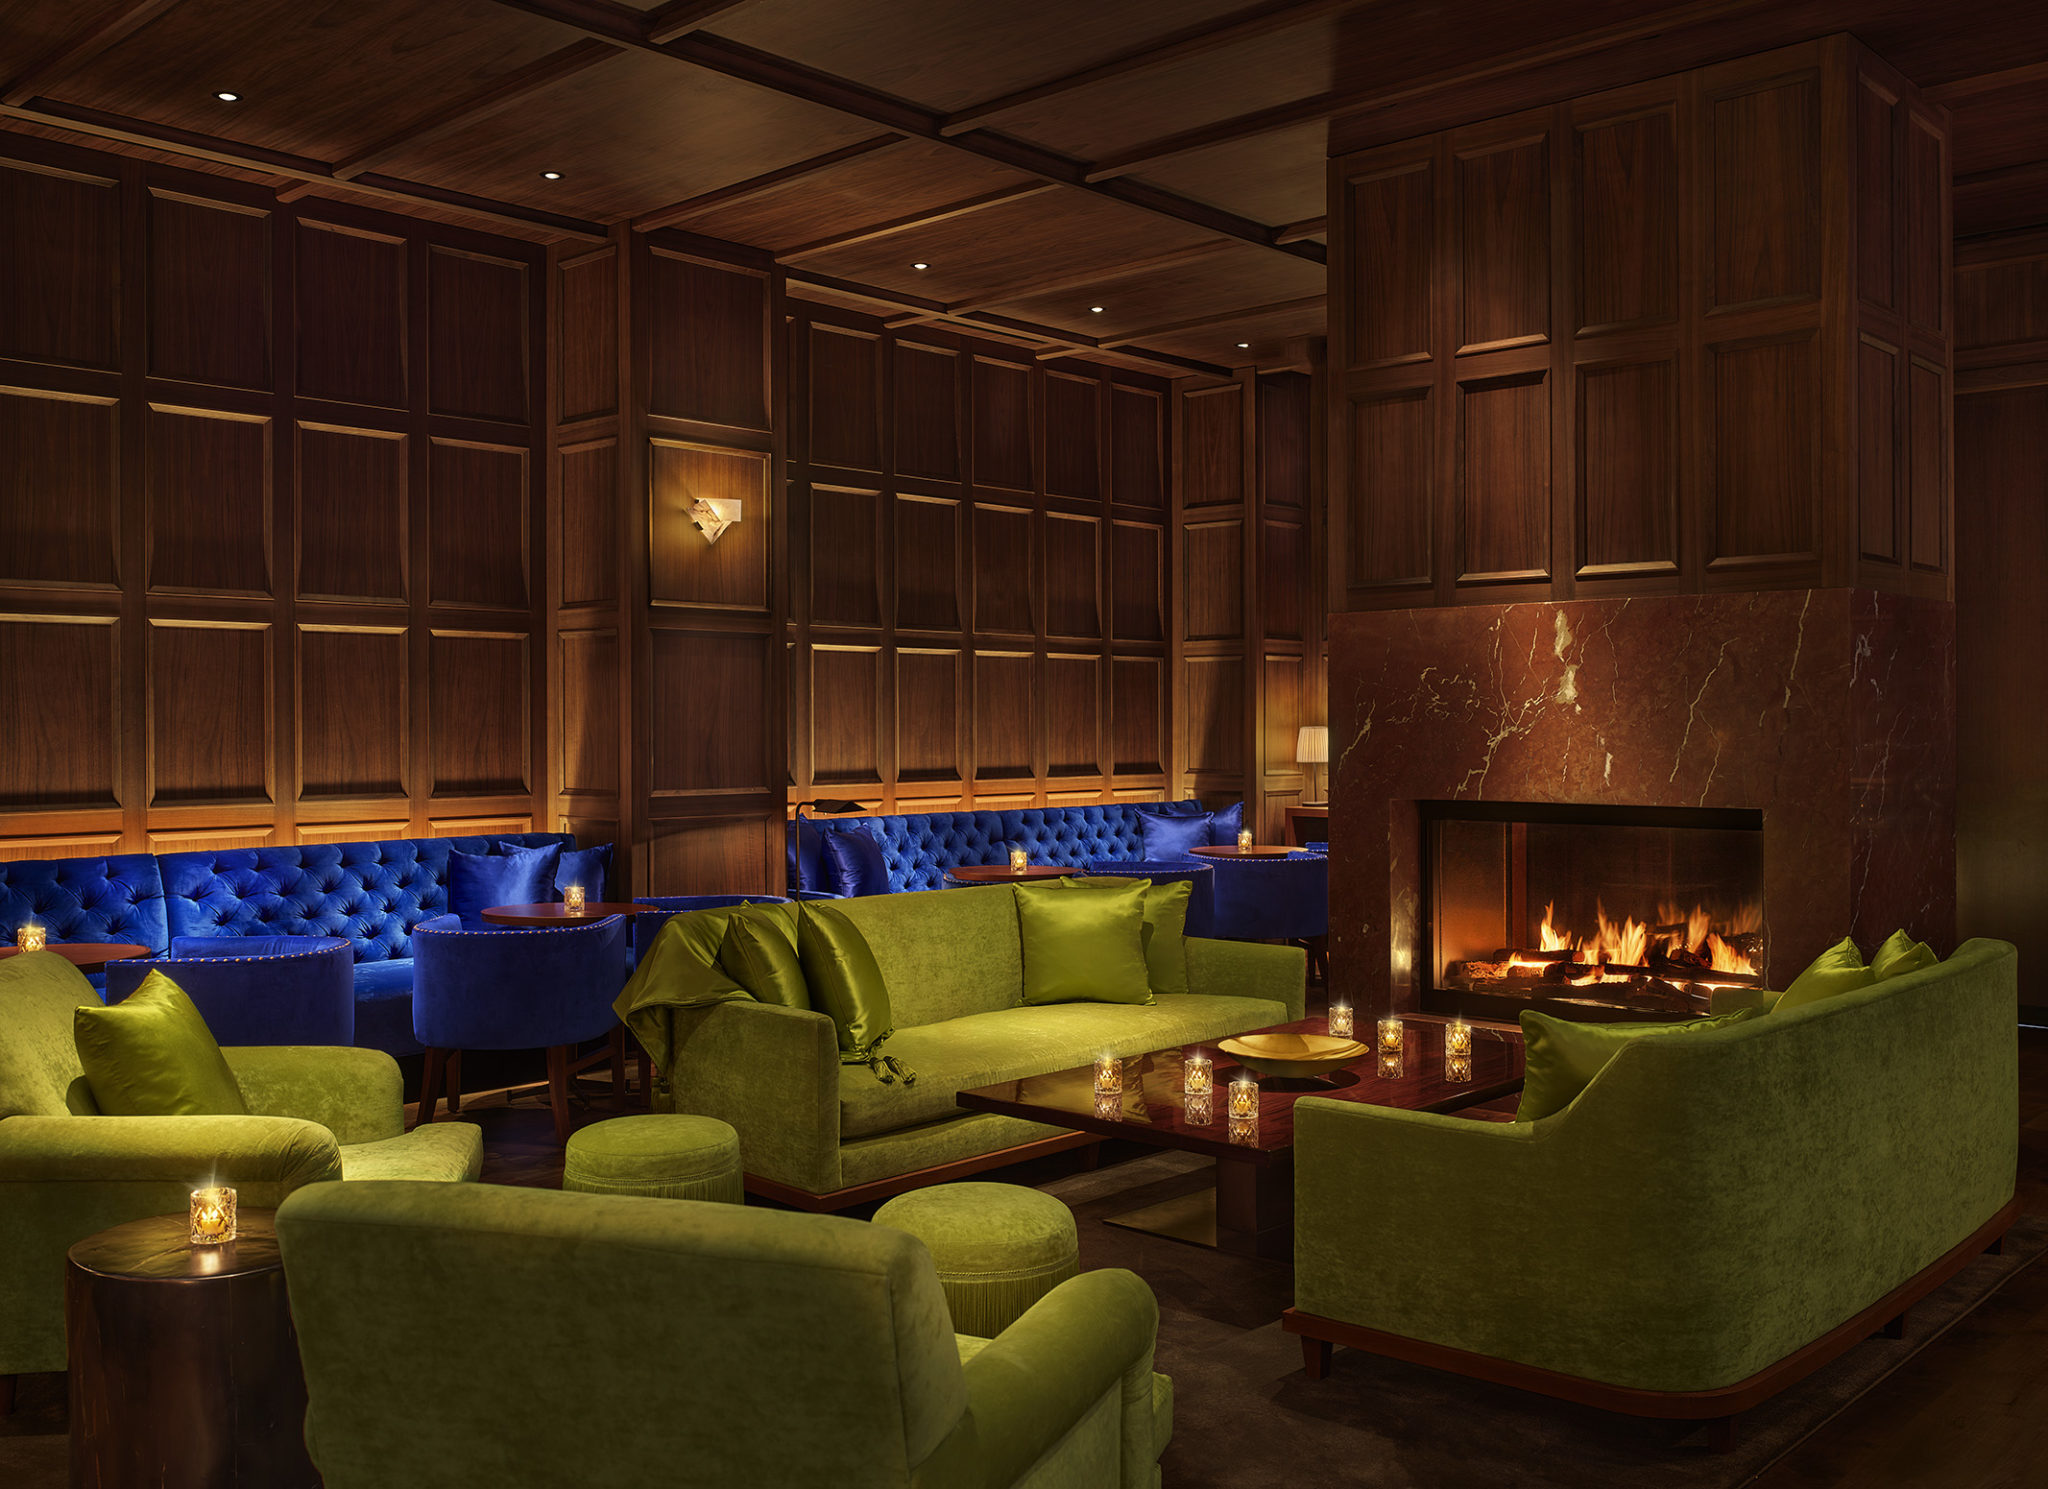 Dimly lit lounge with bright blue and green velvet seating and fireplace